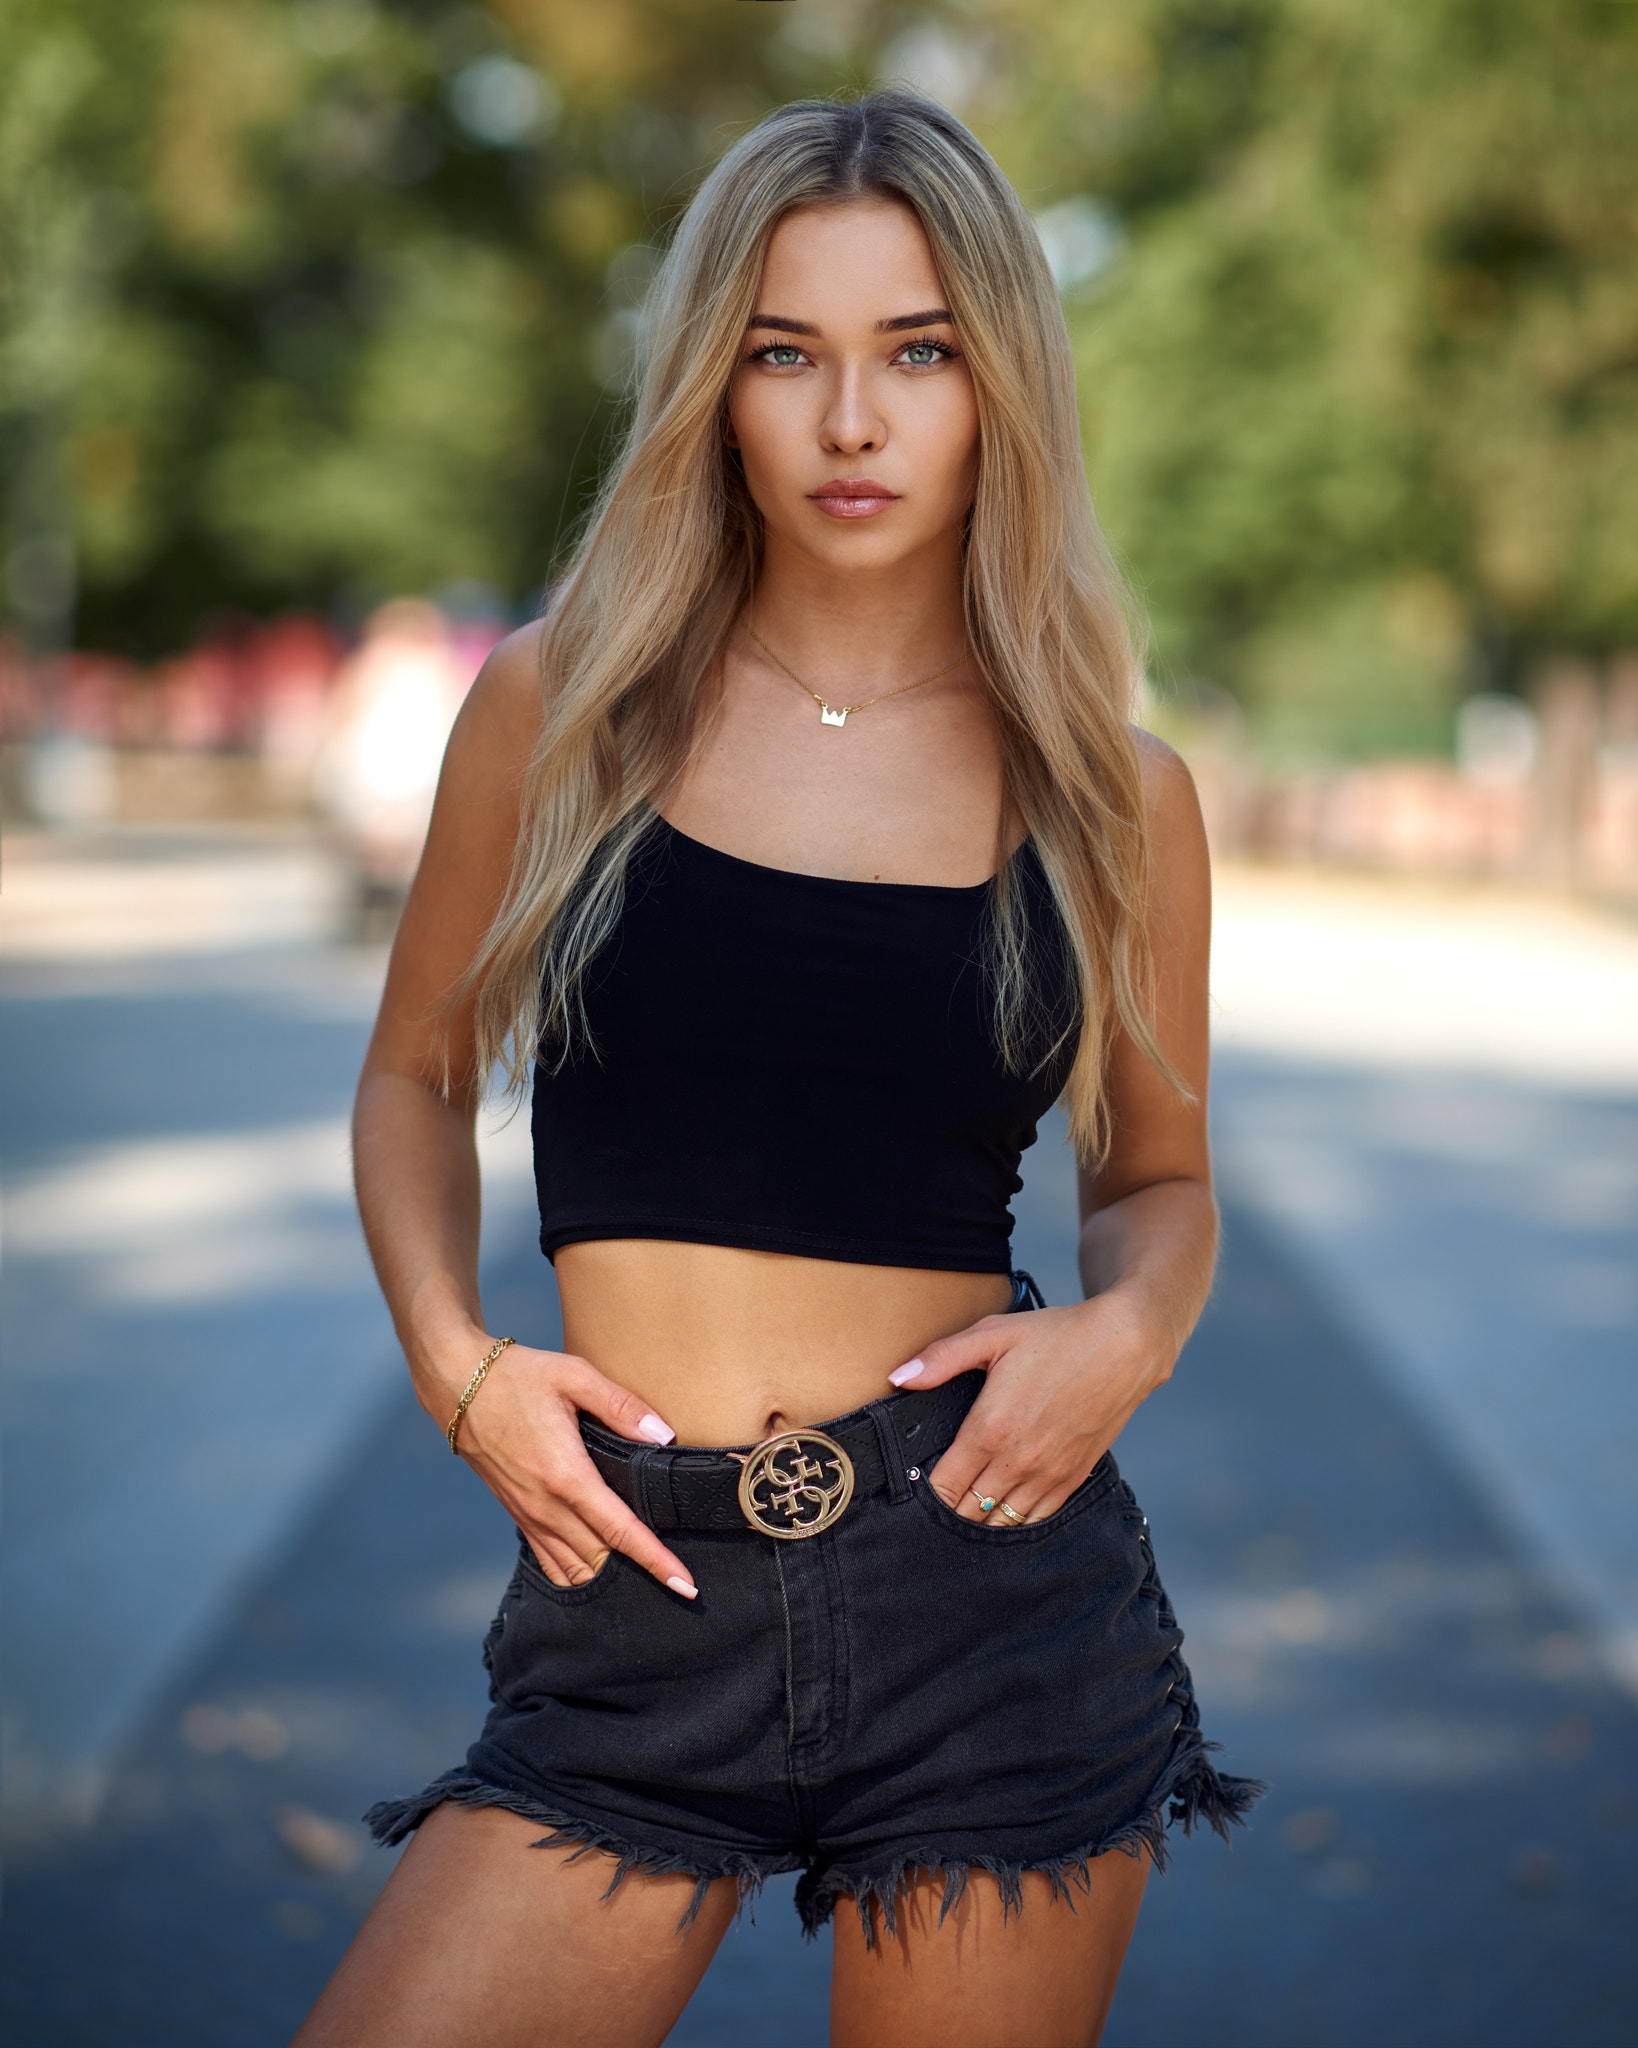 Bulinko Piotr Women Blonde Long Hair Looking At Viewer Jewelry Gold Necklace Tank Top Black Clothing 1638x2048